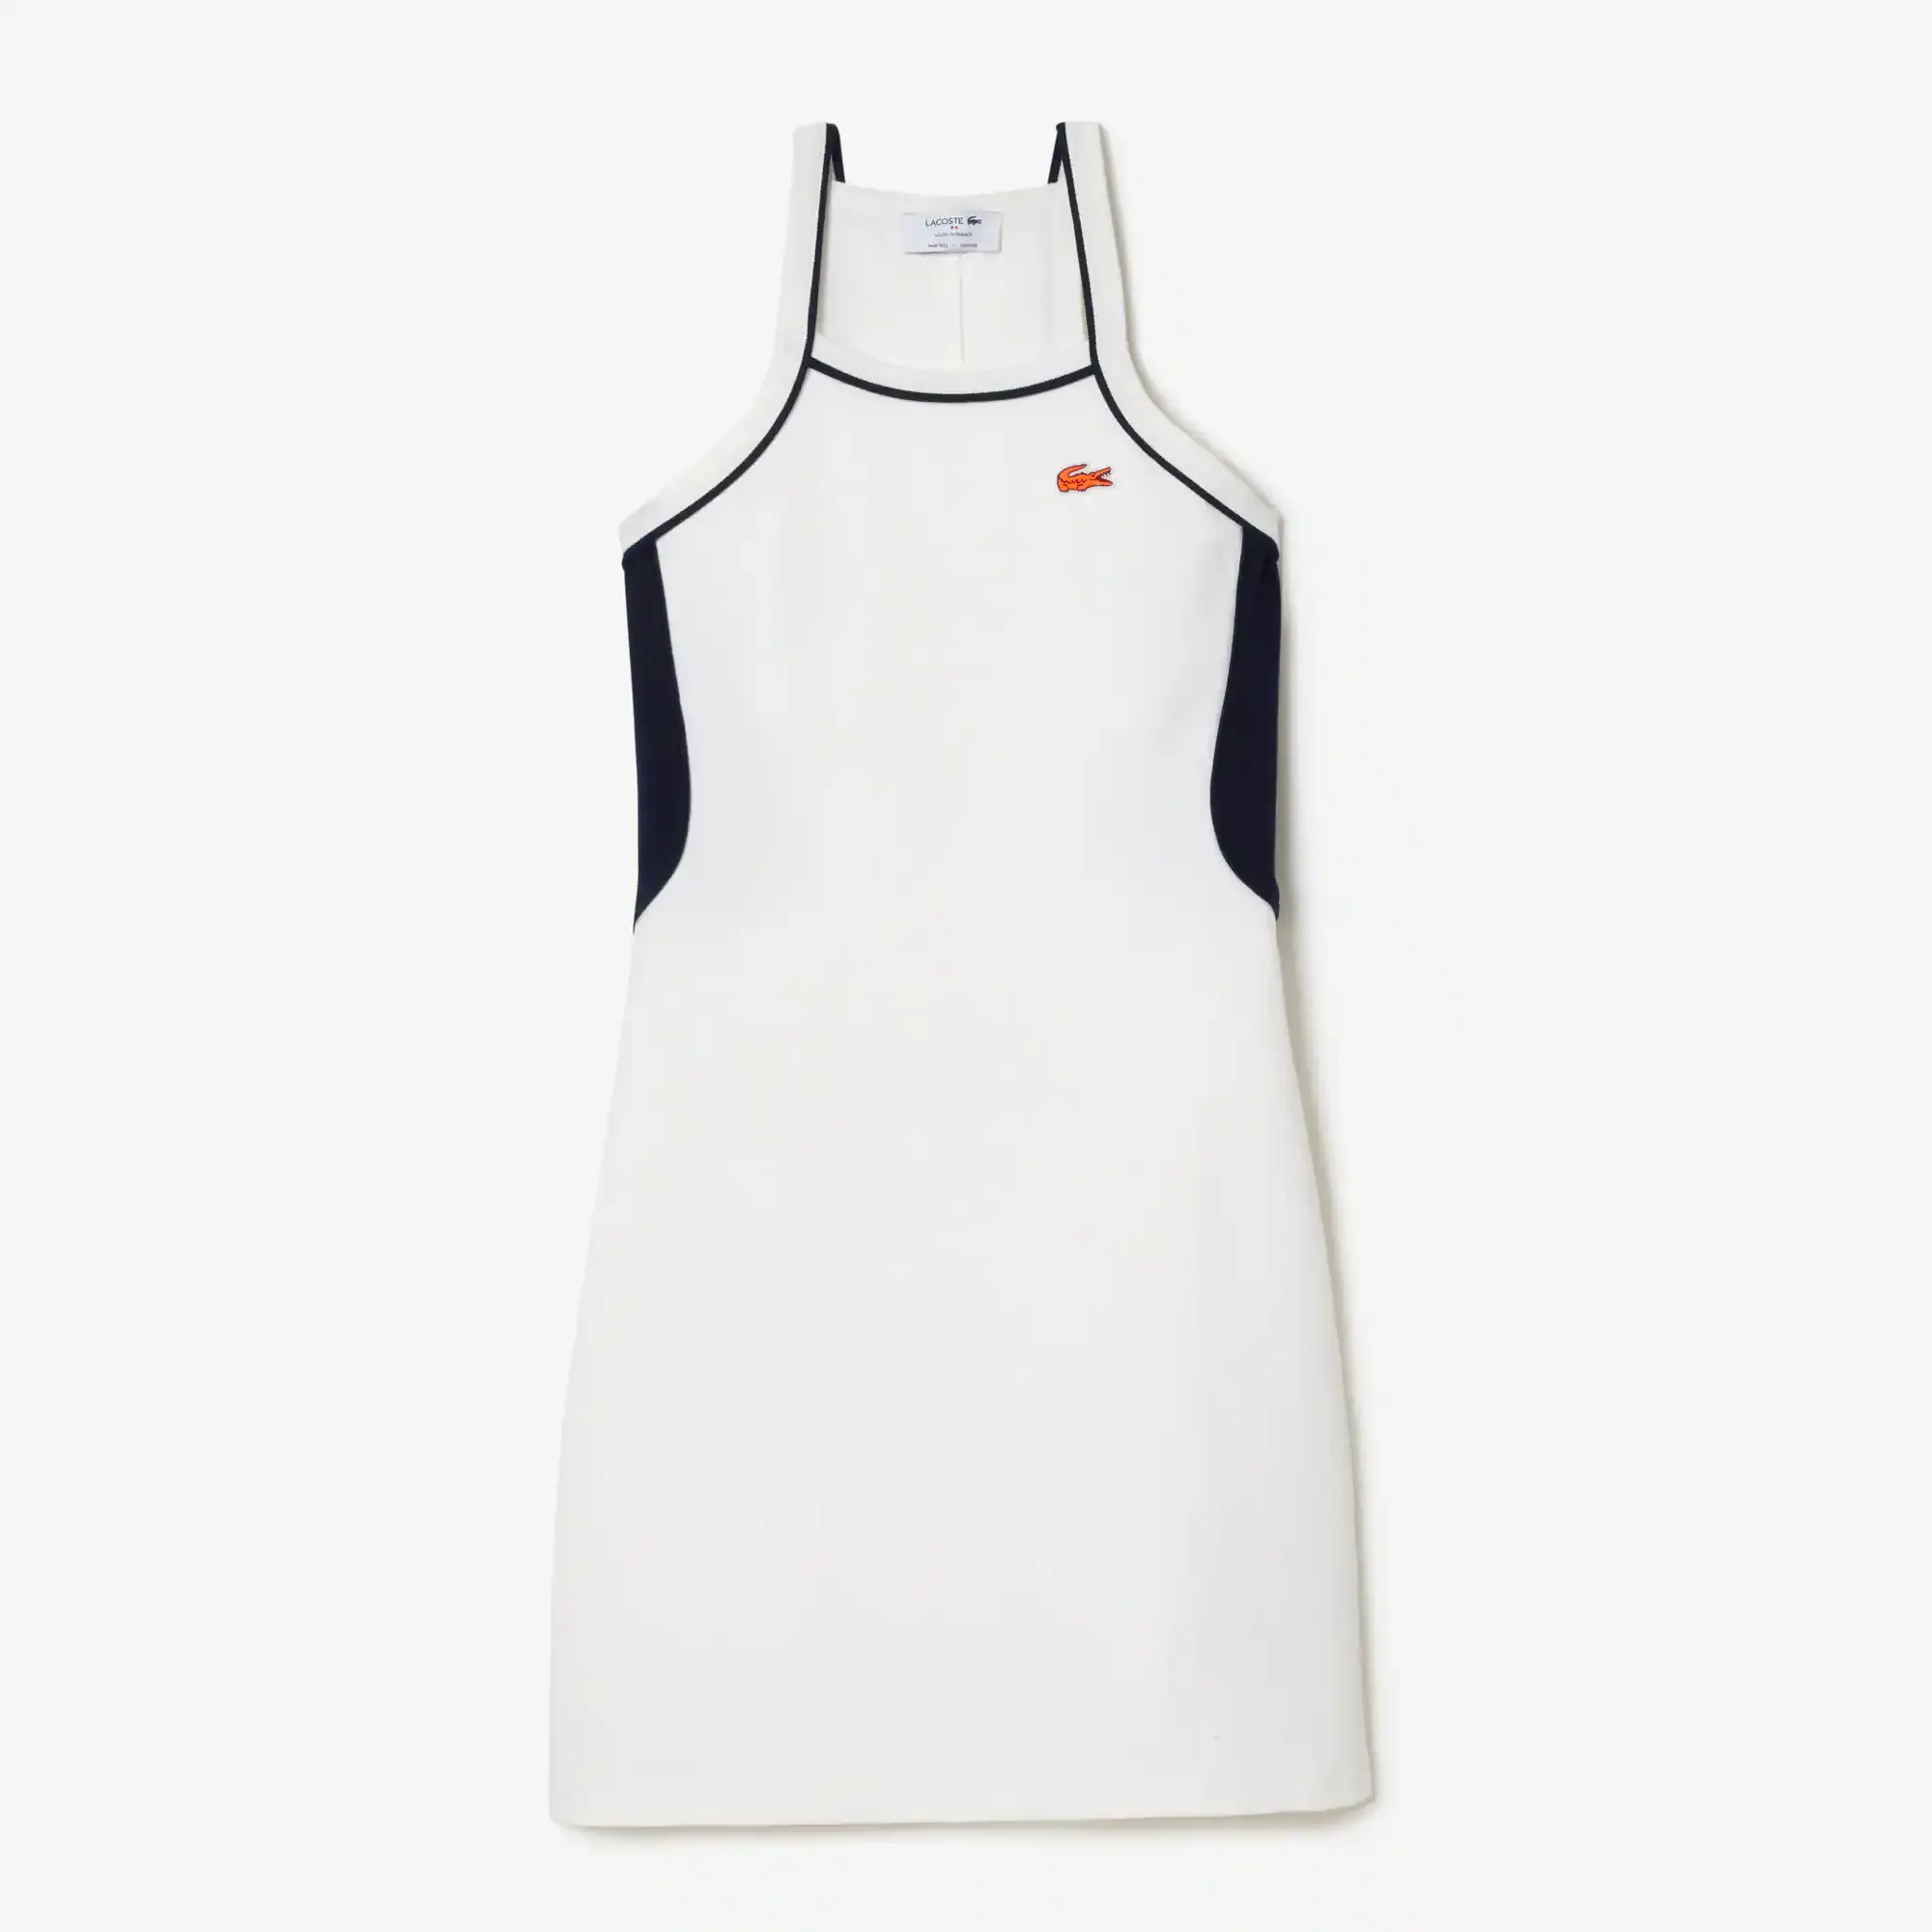 Lacoste Women’s Made In France Organic Cotton Tennis Dress. 2